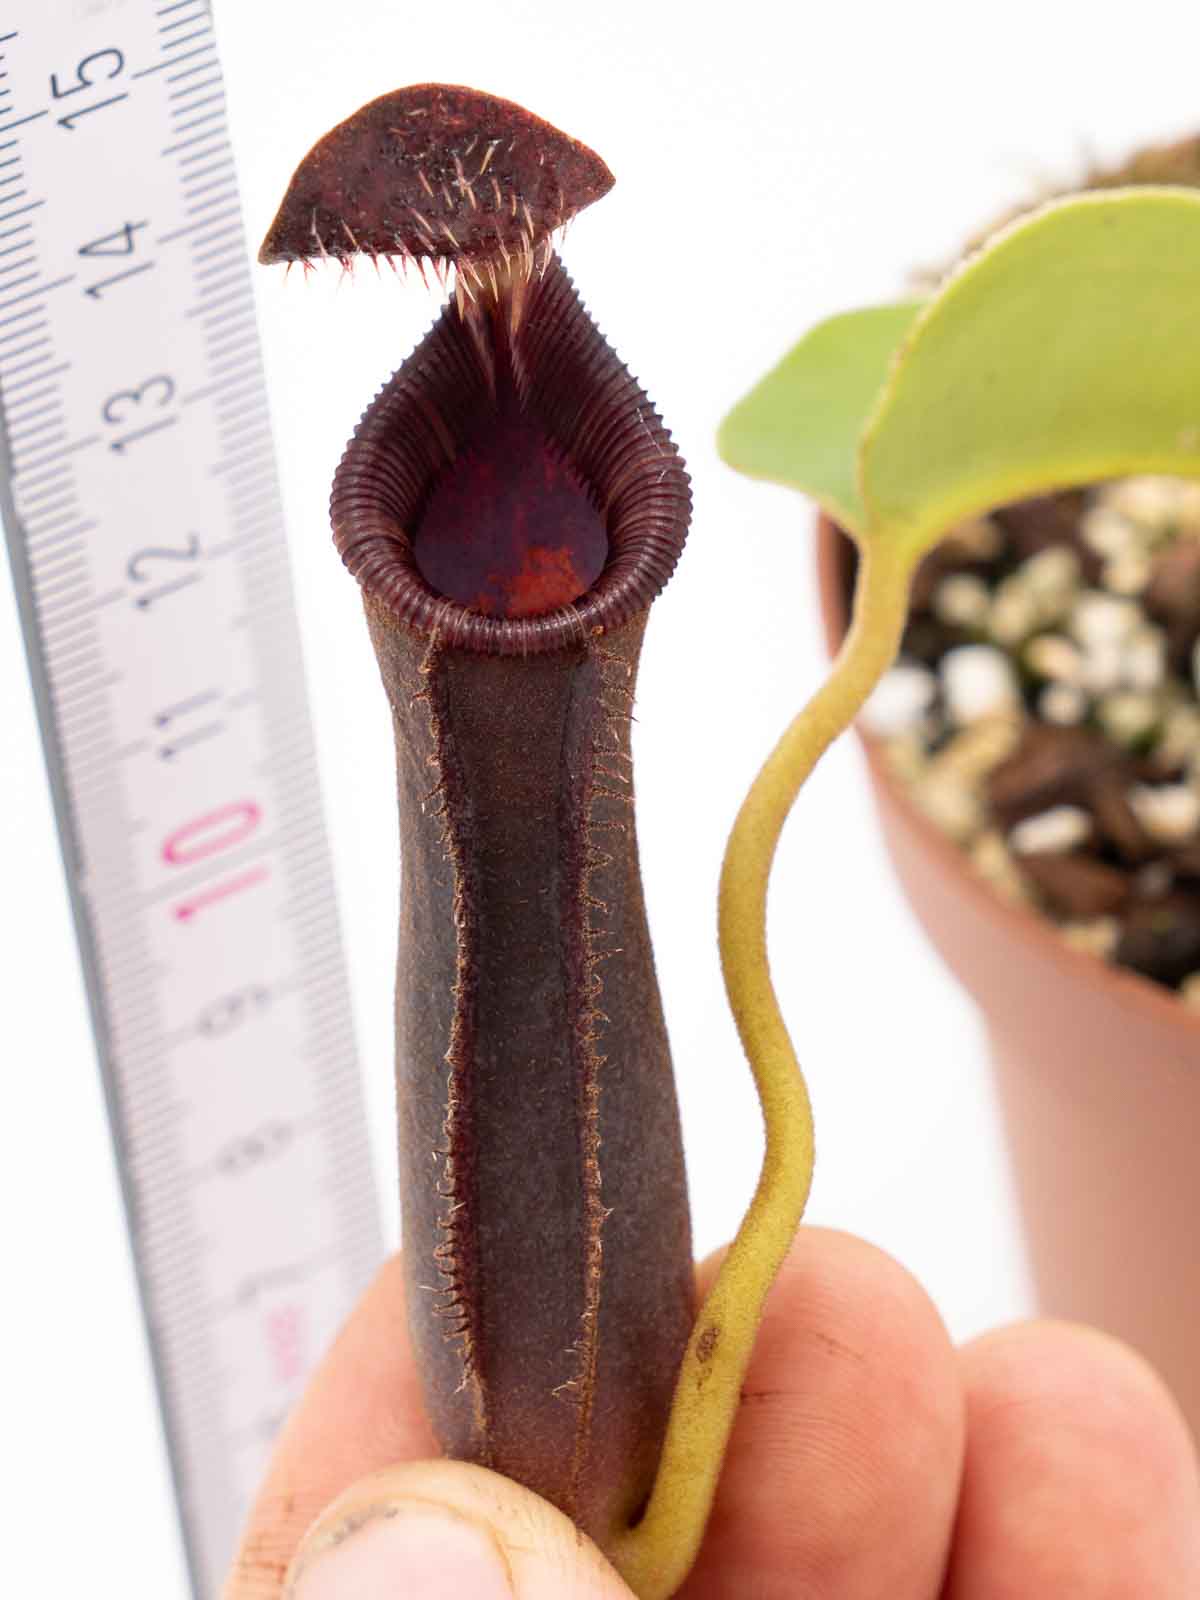 Auktion 038 - Nepenthes lowii 'Trusmadi'